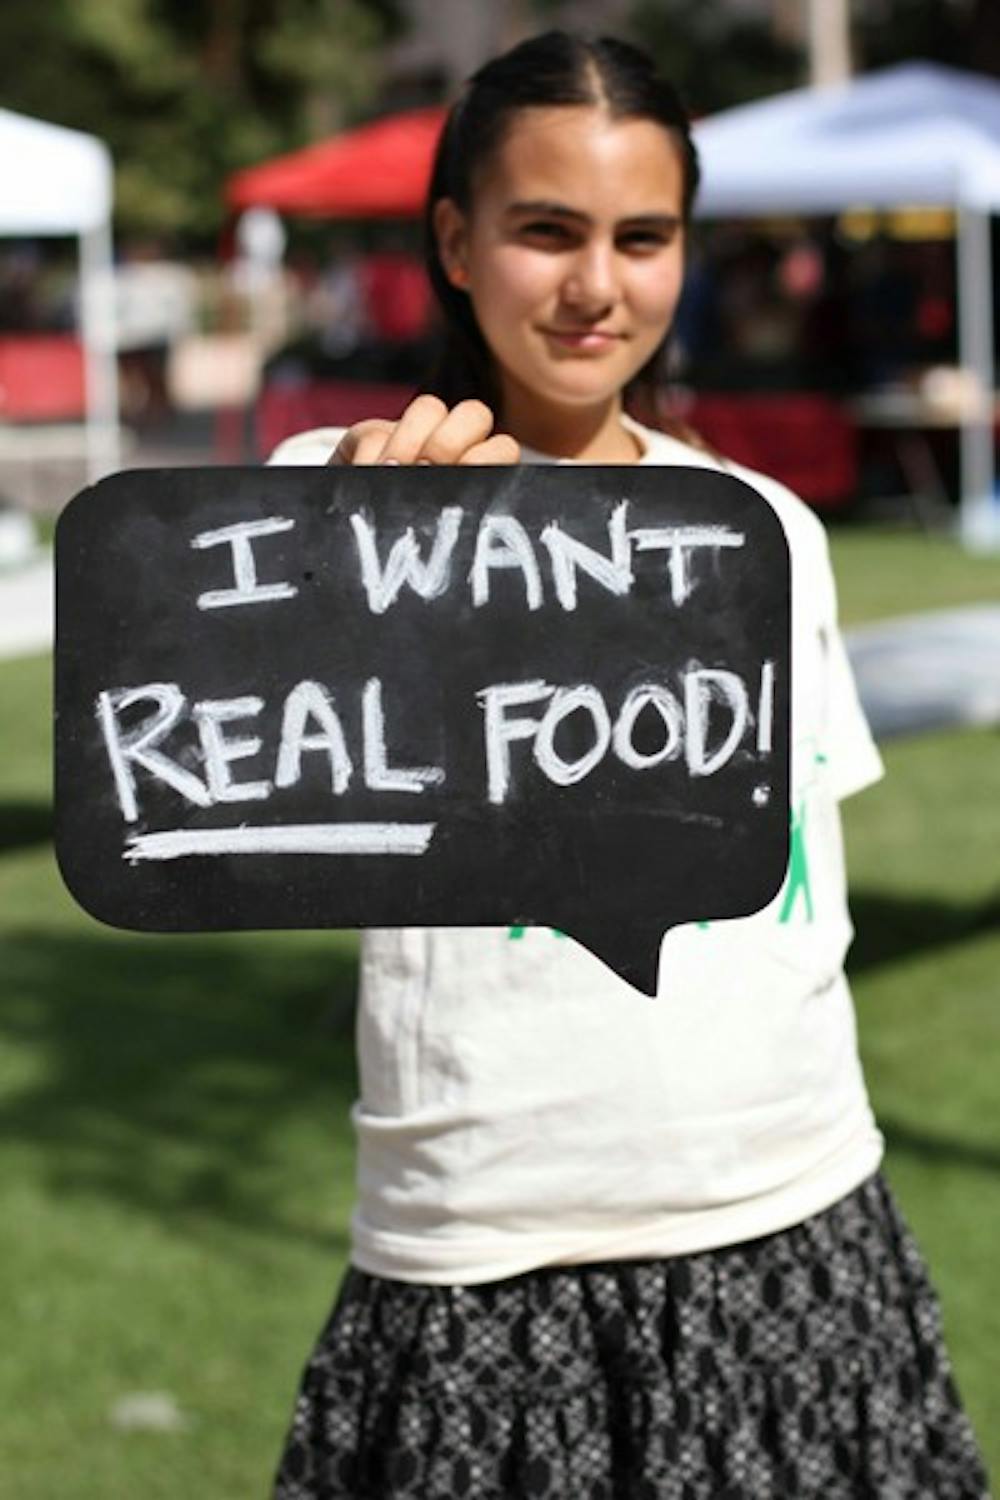 FOOD CRITICS: Volunteer Nicole Maria helped with the Real Food Challenge on the Tempe campus Tuesday.  The group is petitioning campus food providers to offer healthier and more diverse food choices. (Photo by Lisa Bartoli)